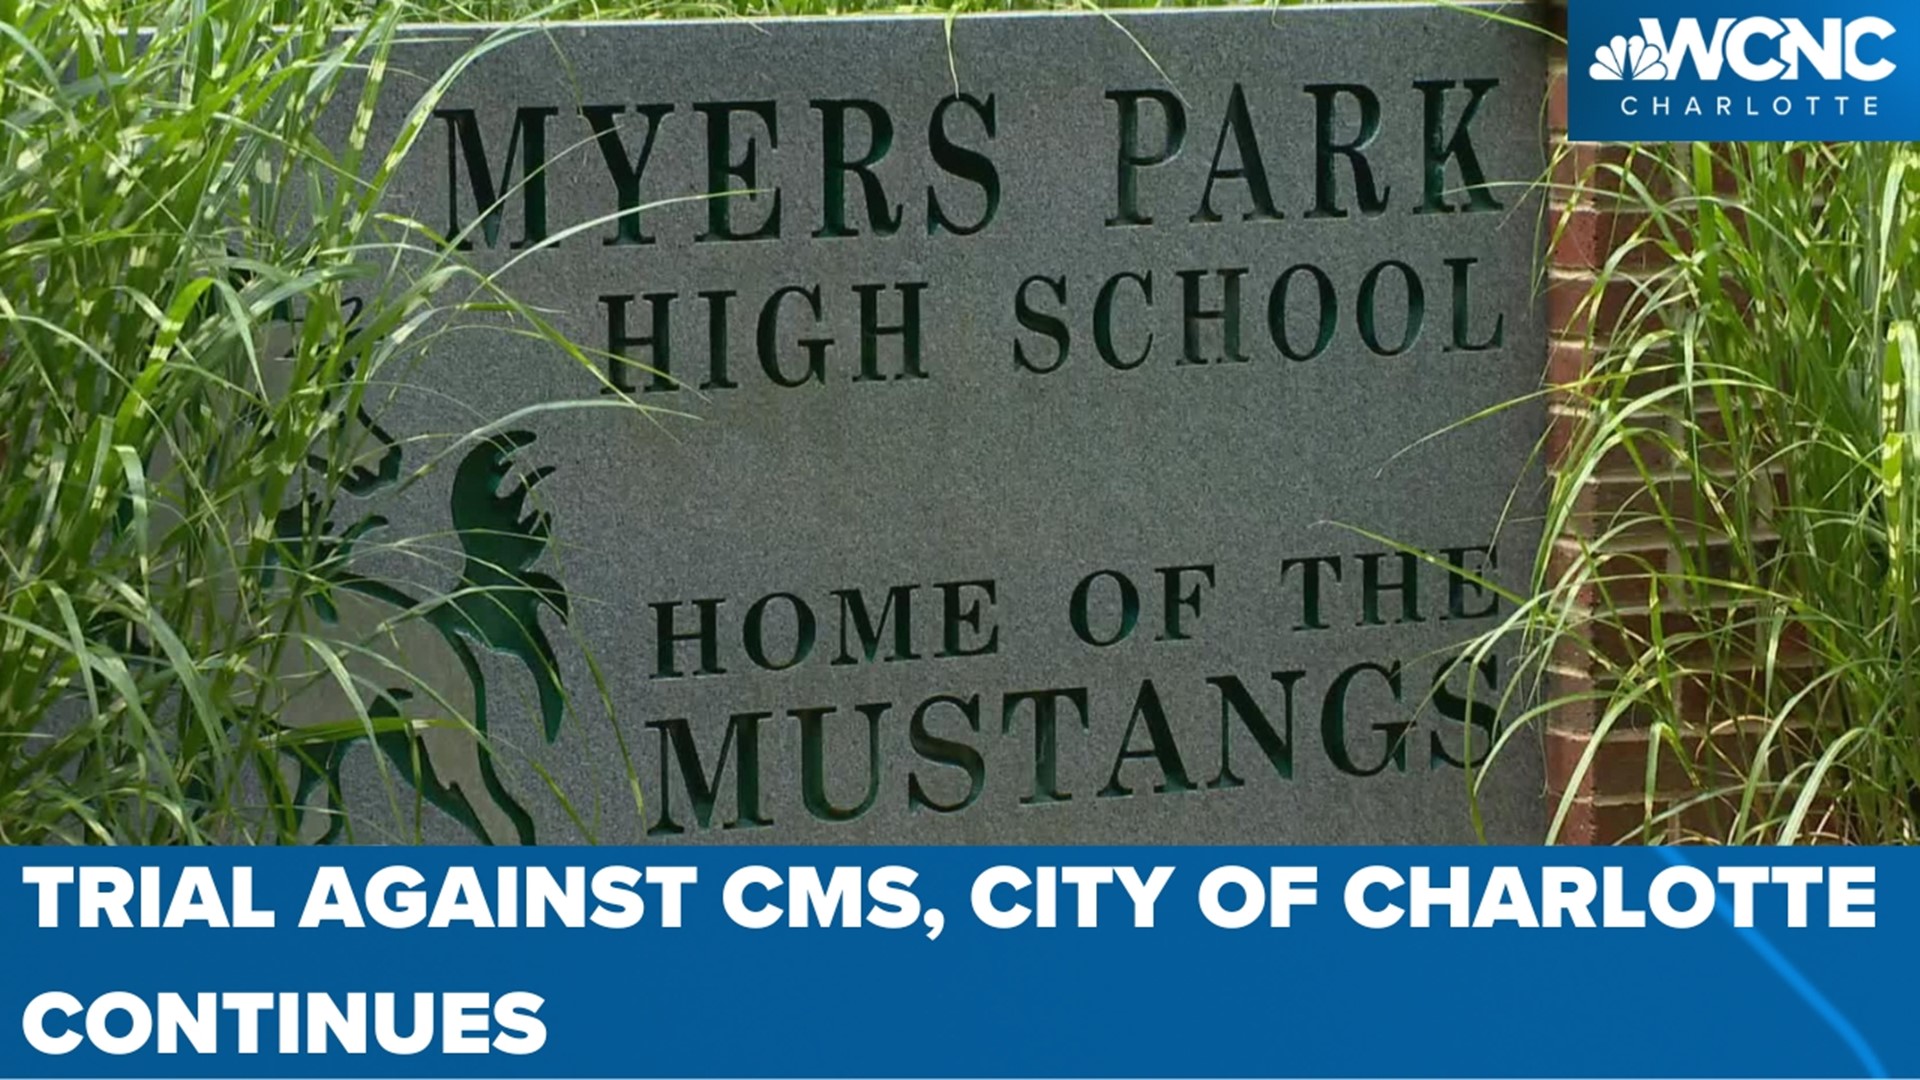 Highschoolsex - Third day of Myers Park High School sex assault trial sees city of  Charlotte dropped from lawsuit | wcnc.com